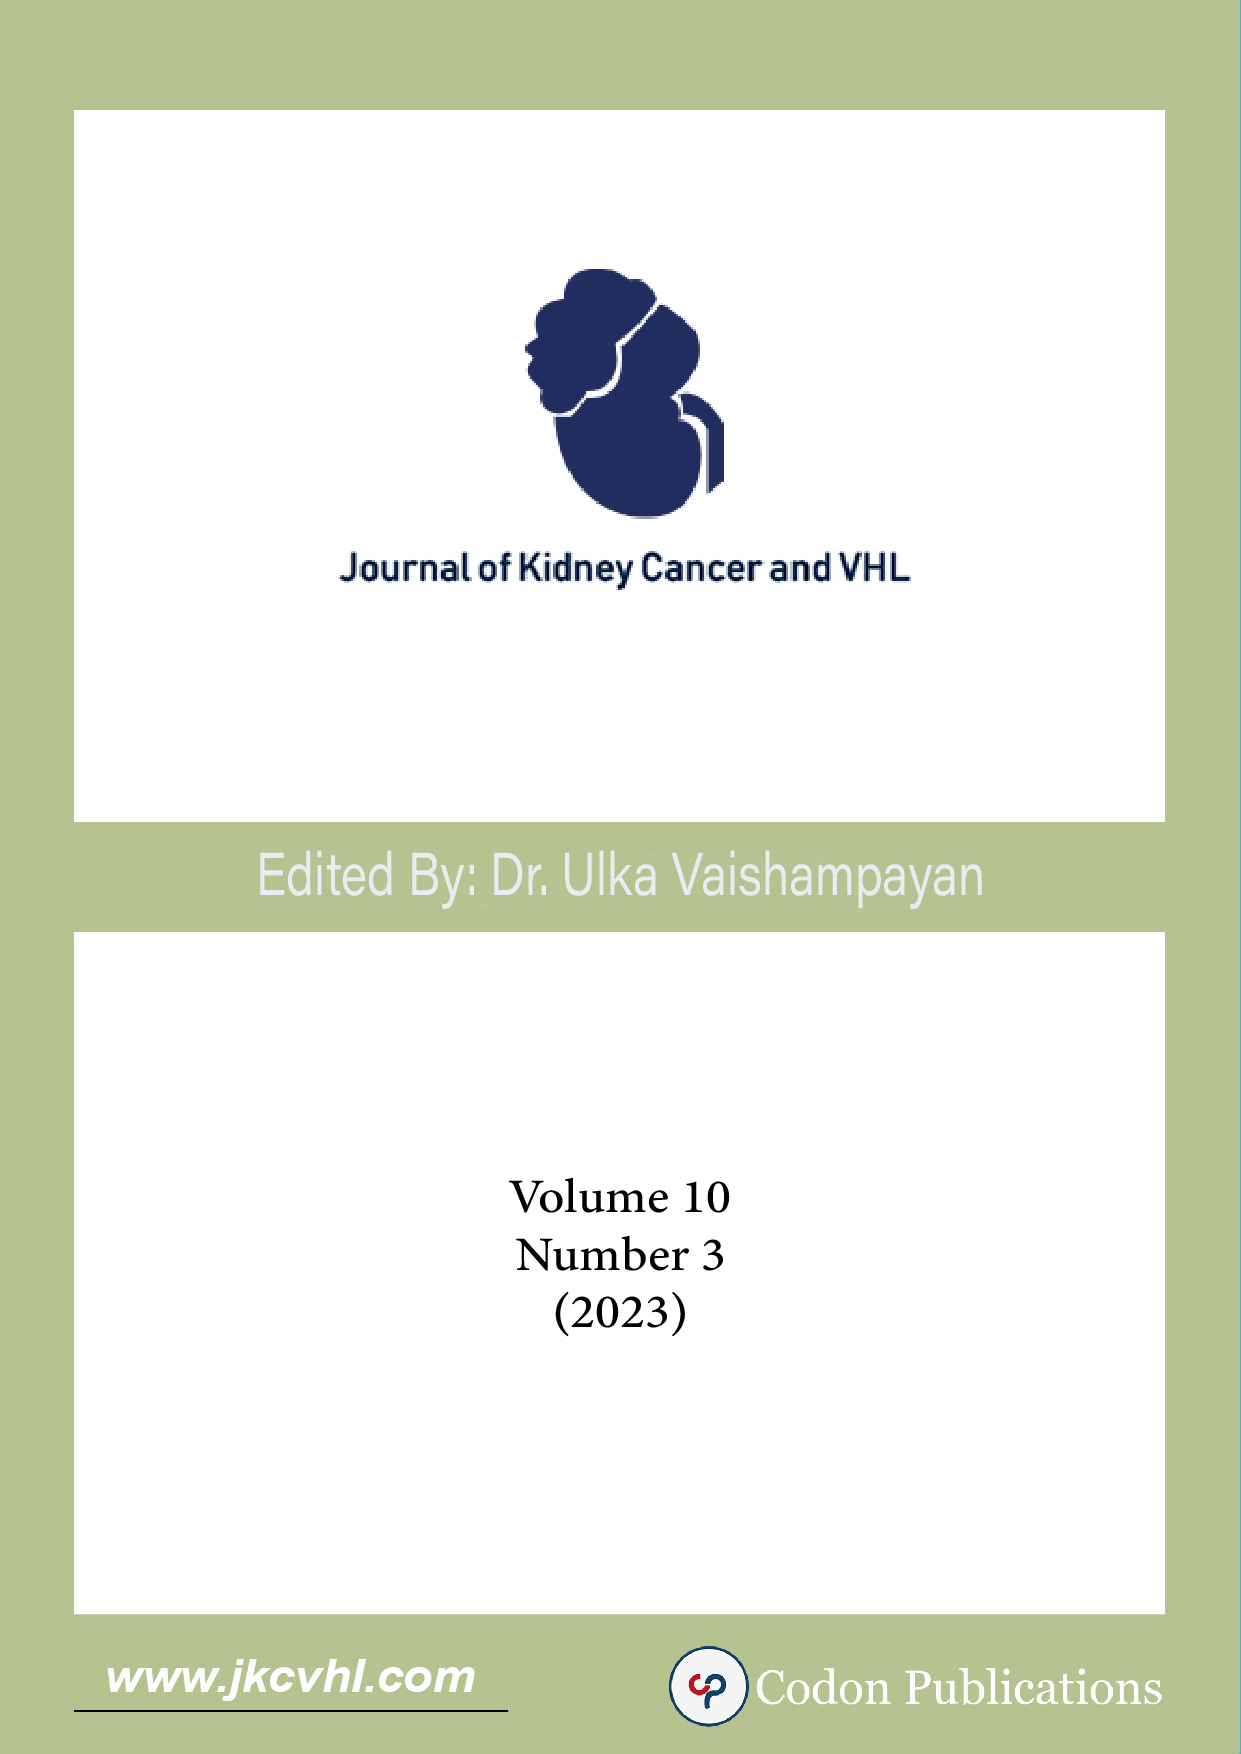 					View Vol. 10 No. 3 (2023): Journal of Kidney Cancer and VHL 
				